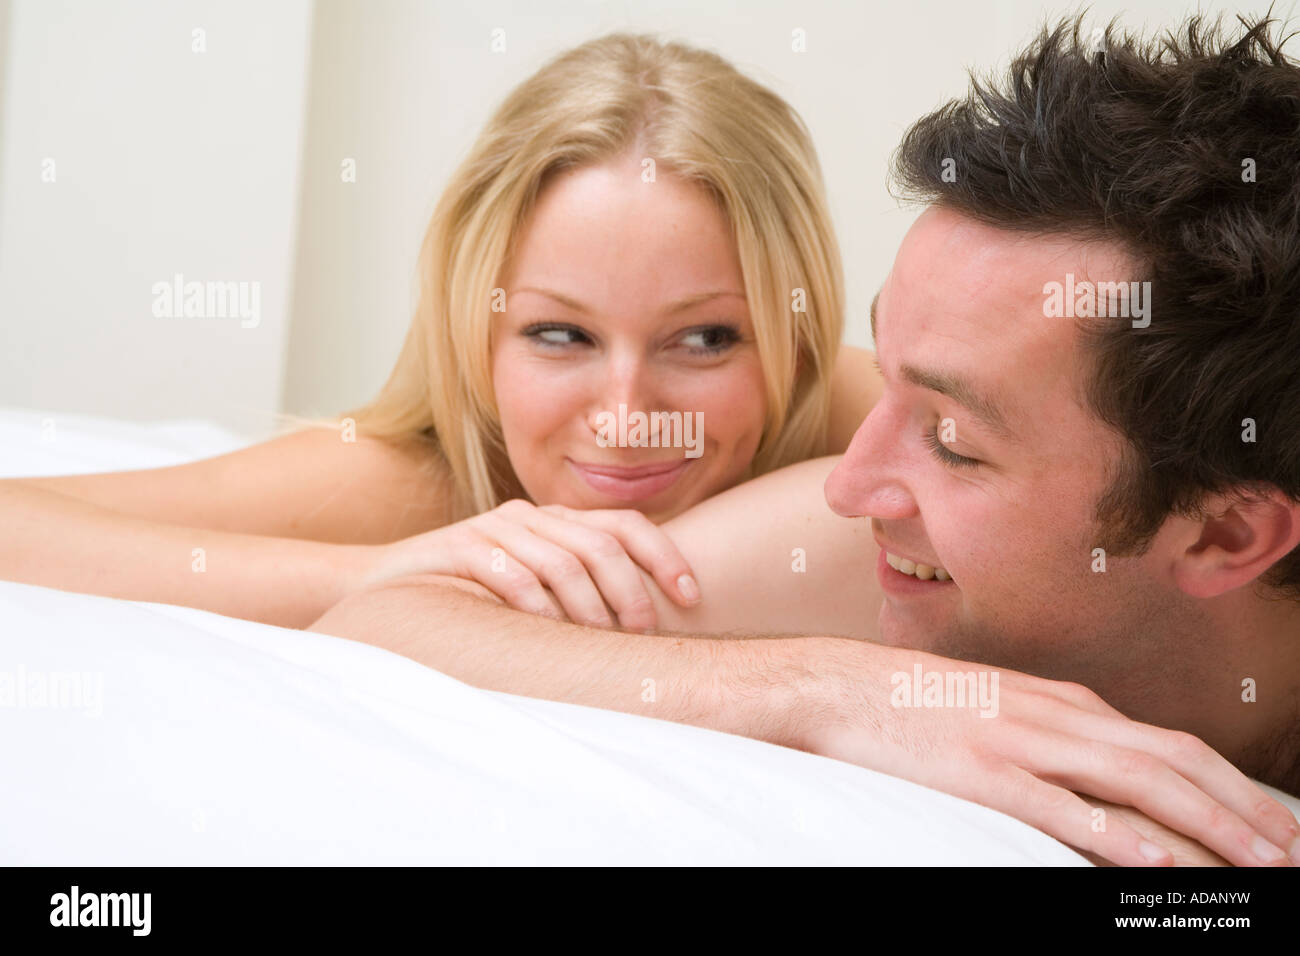 young-naked-couple-cuddling-and-happy-in